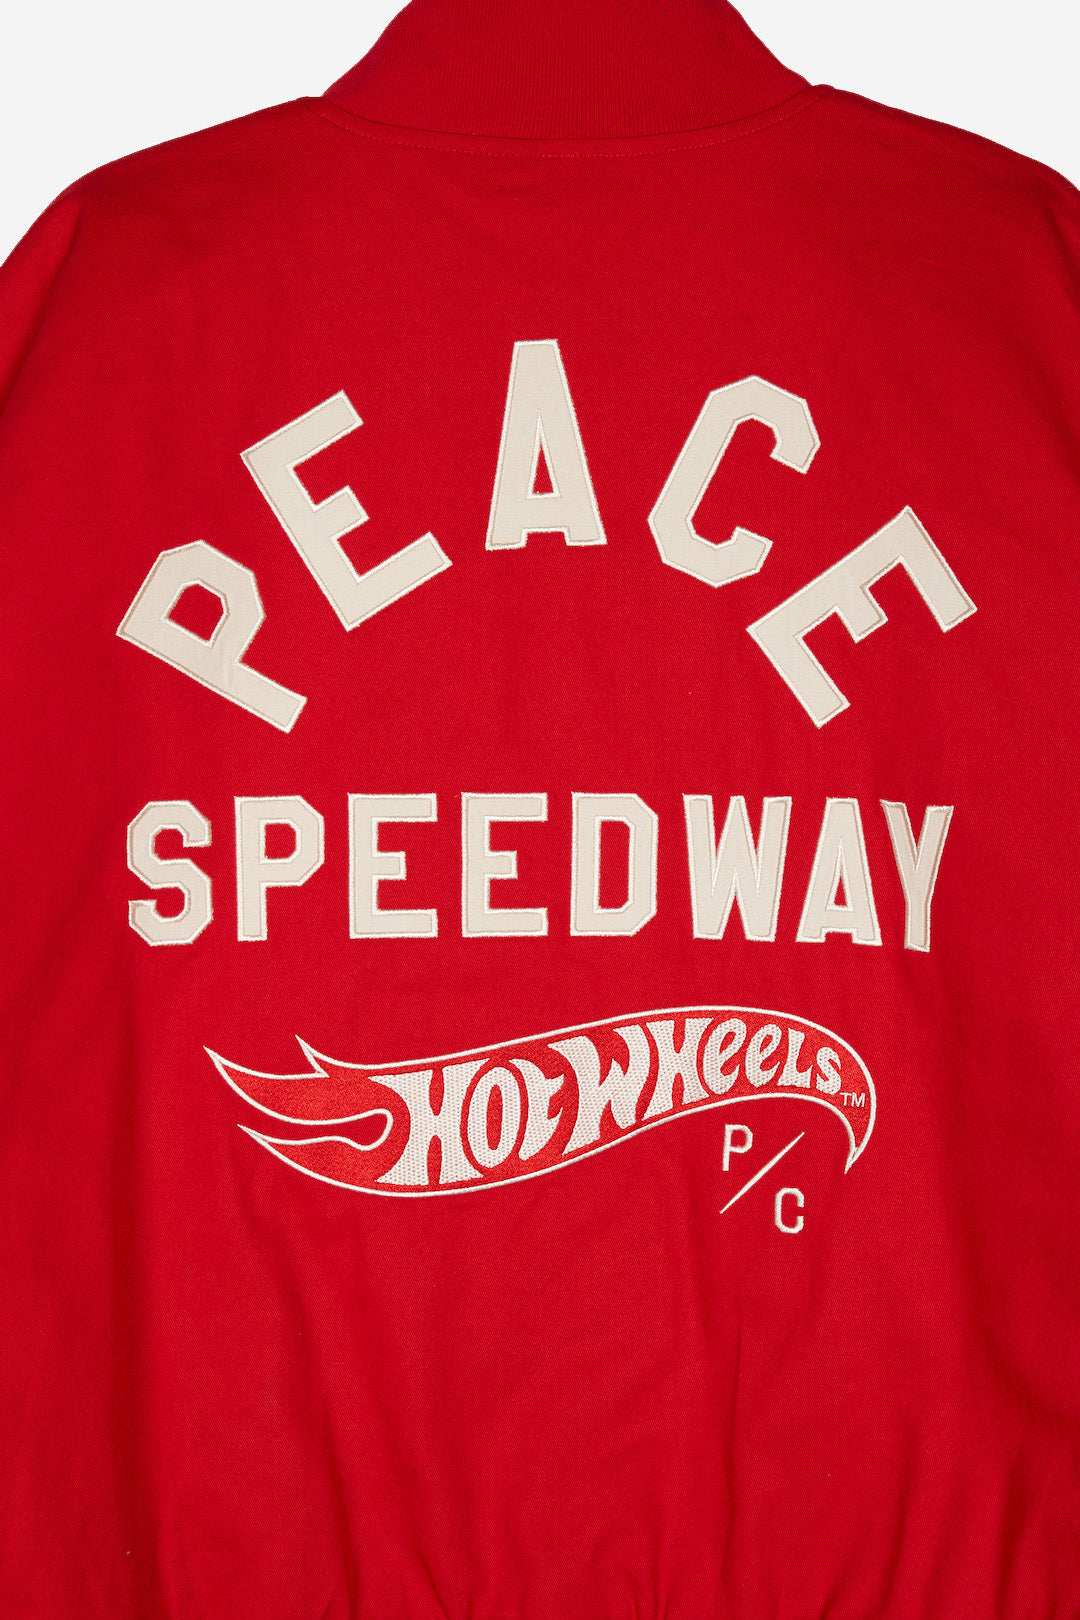 Peace Speedway Racing Jacket - Red